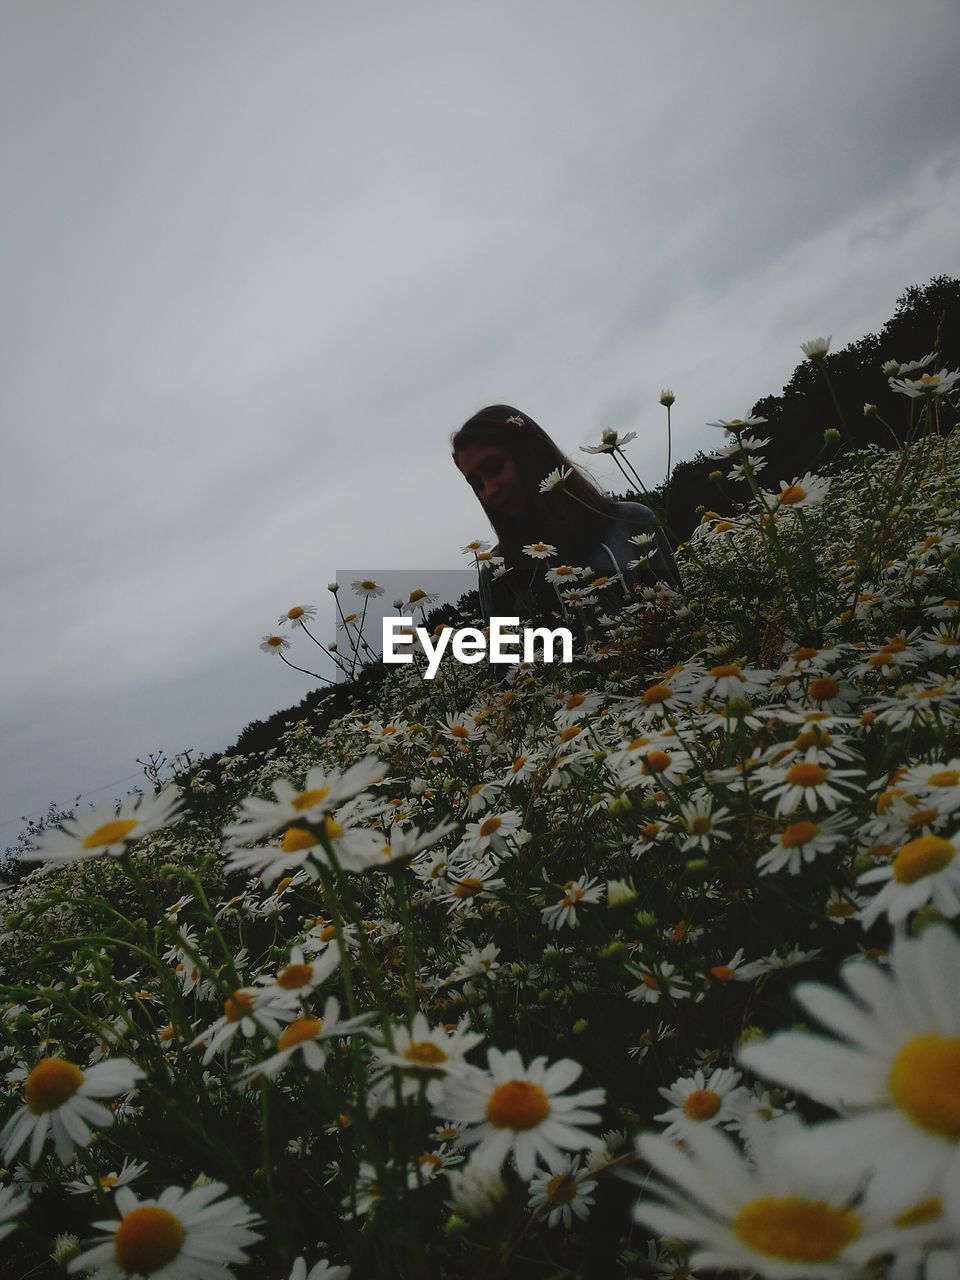 Tilt image of woman surrounded with daises against cloudy sky